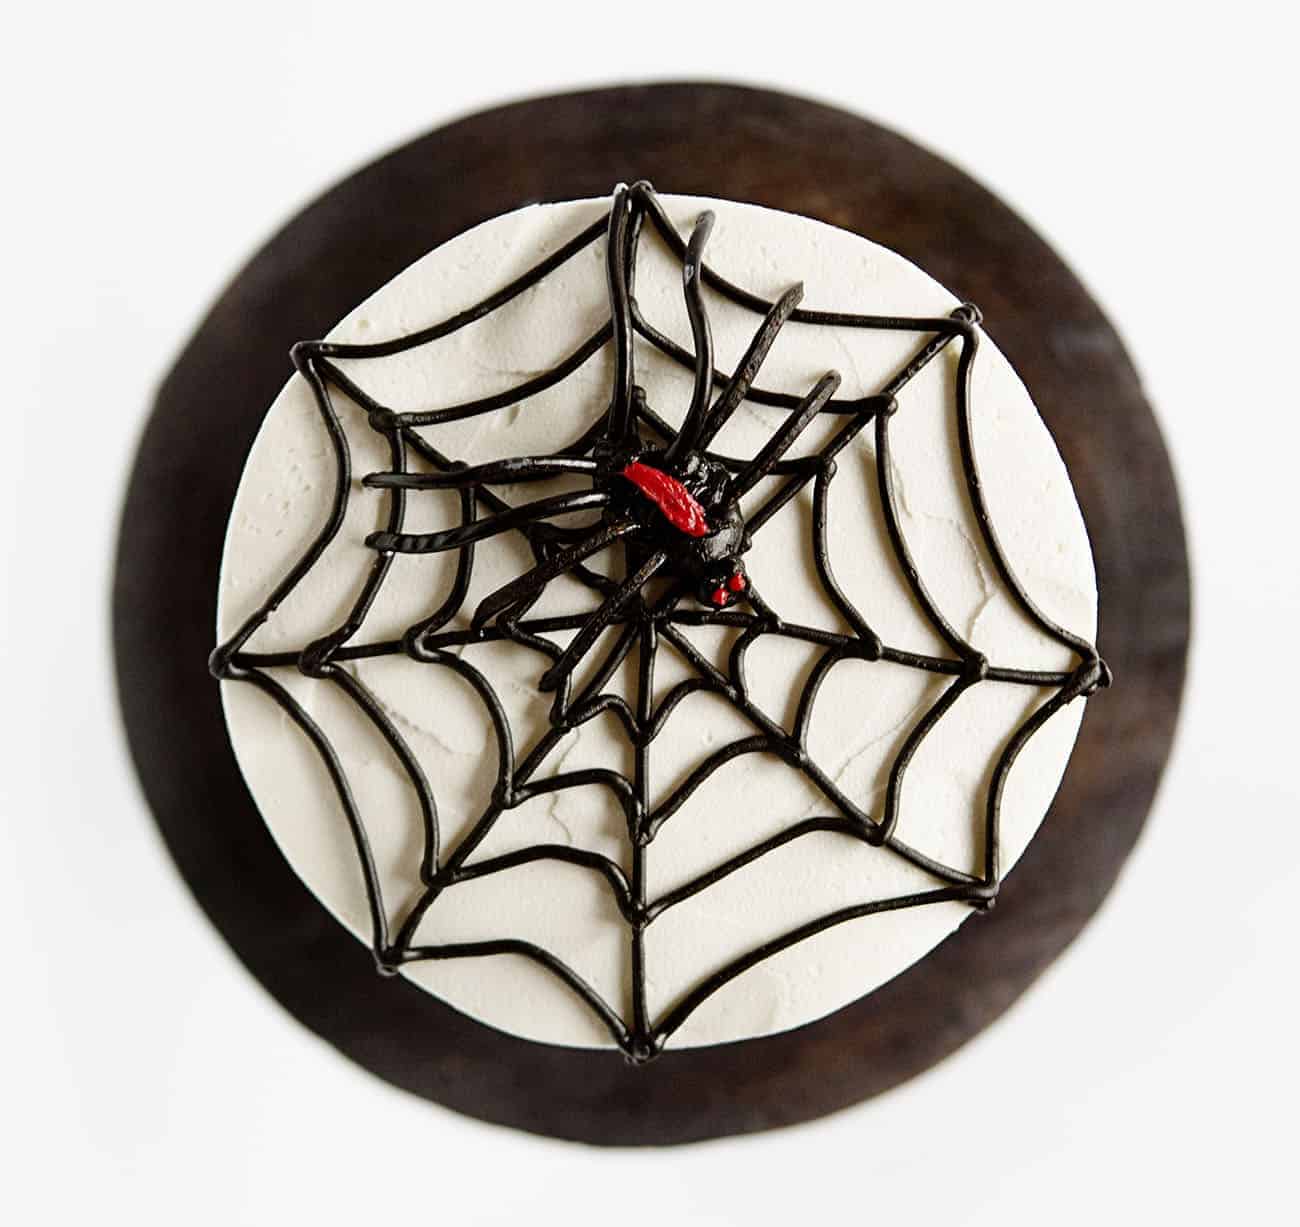 Overhead view of Spider Cake